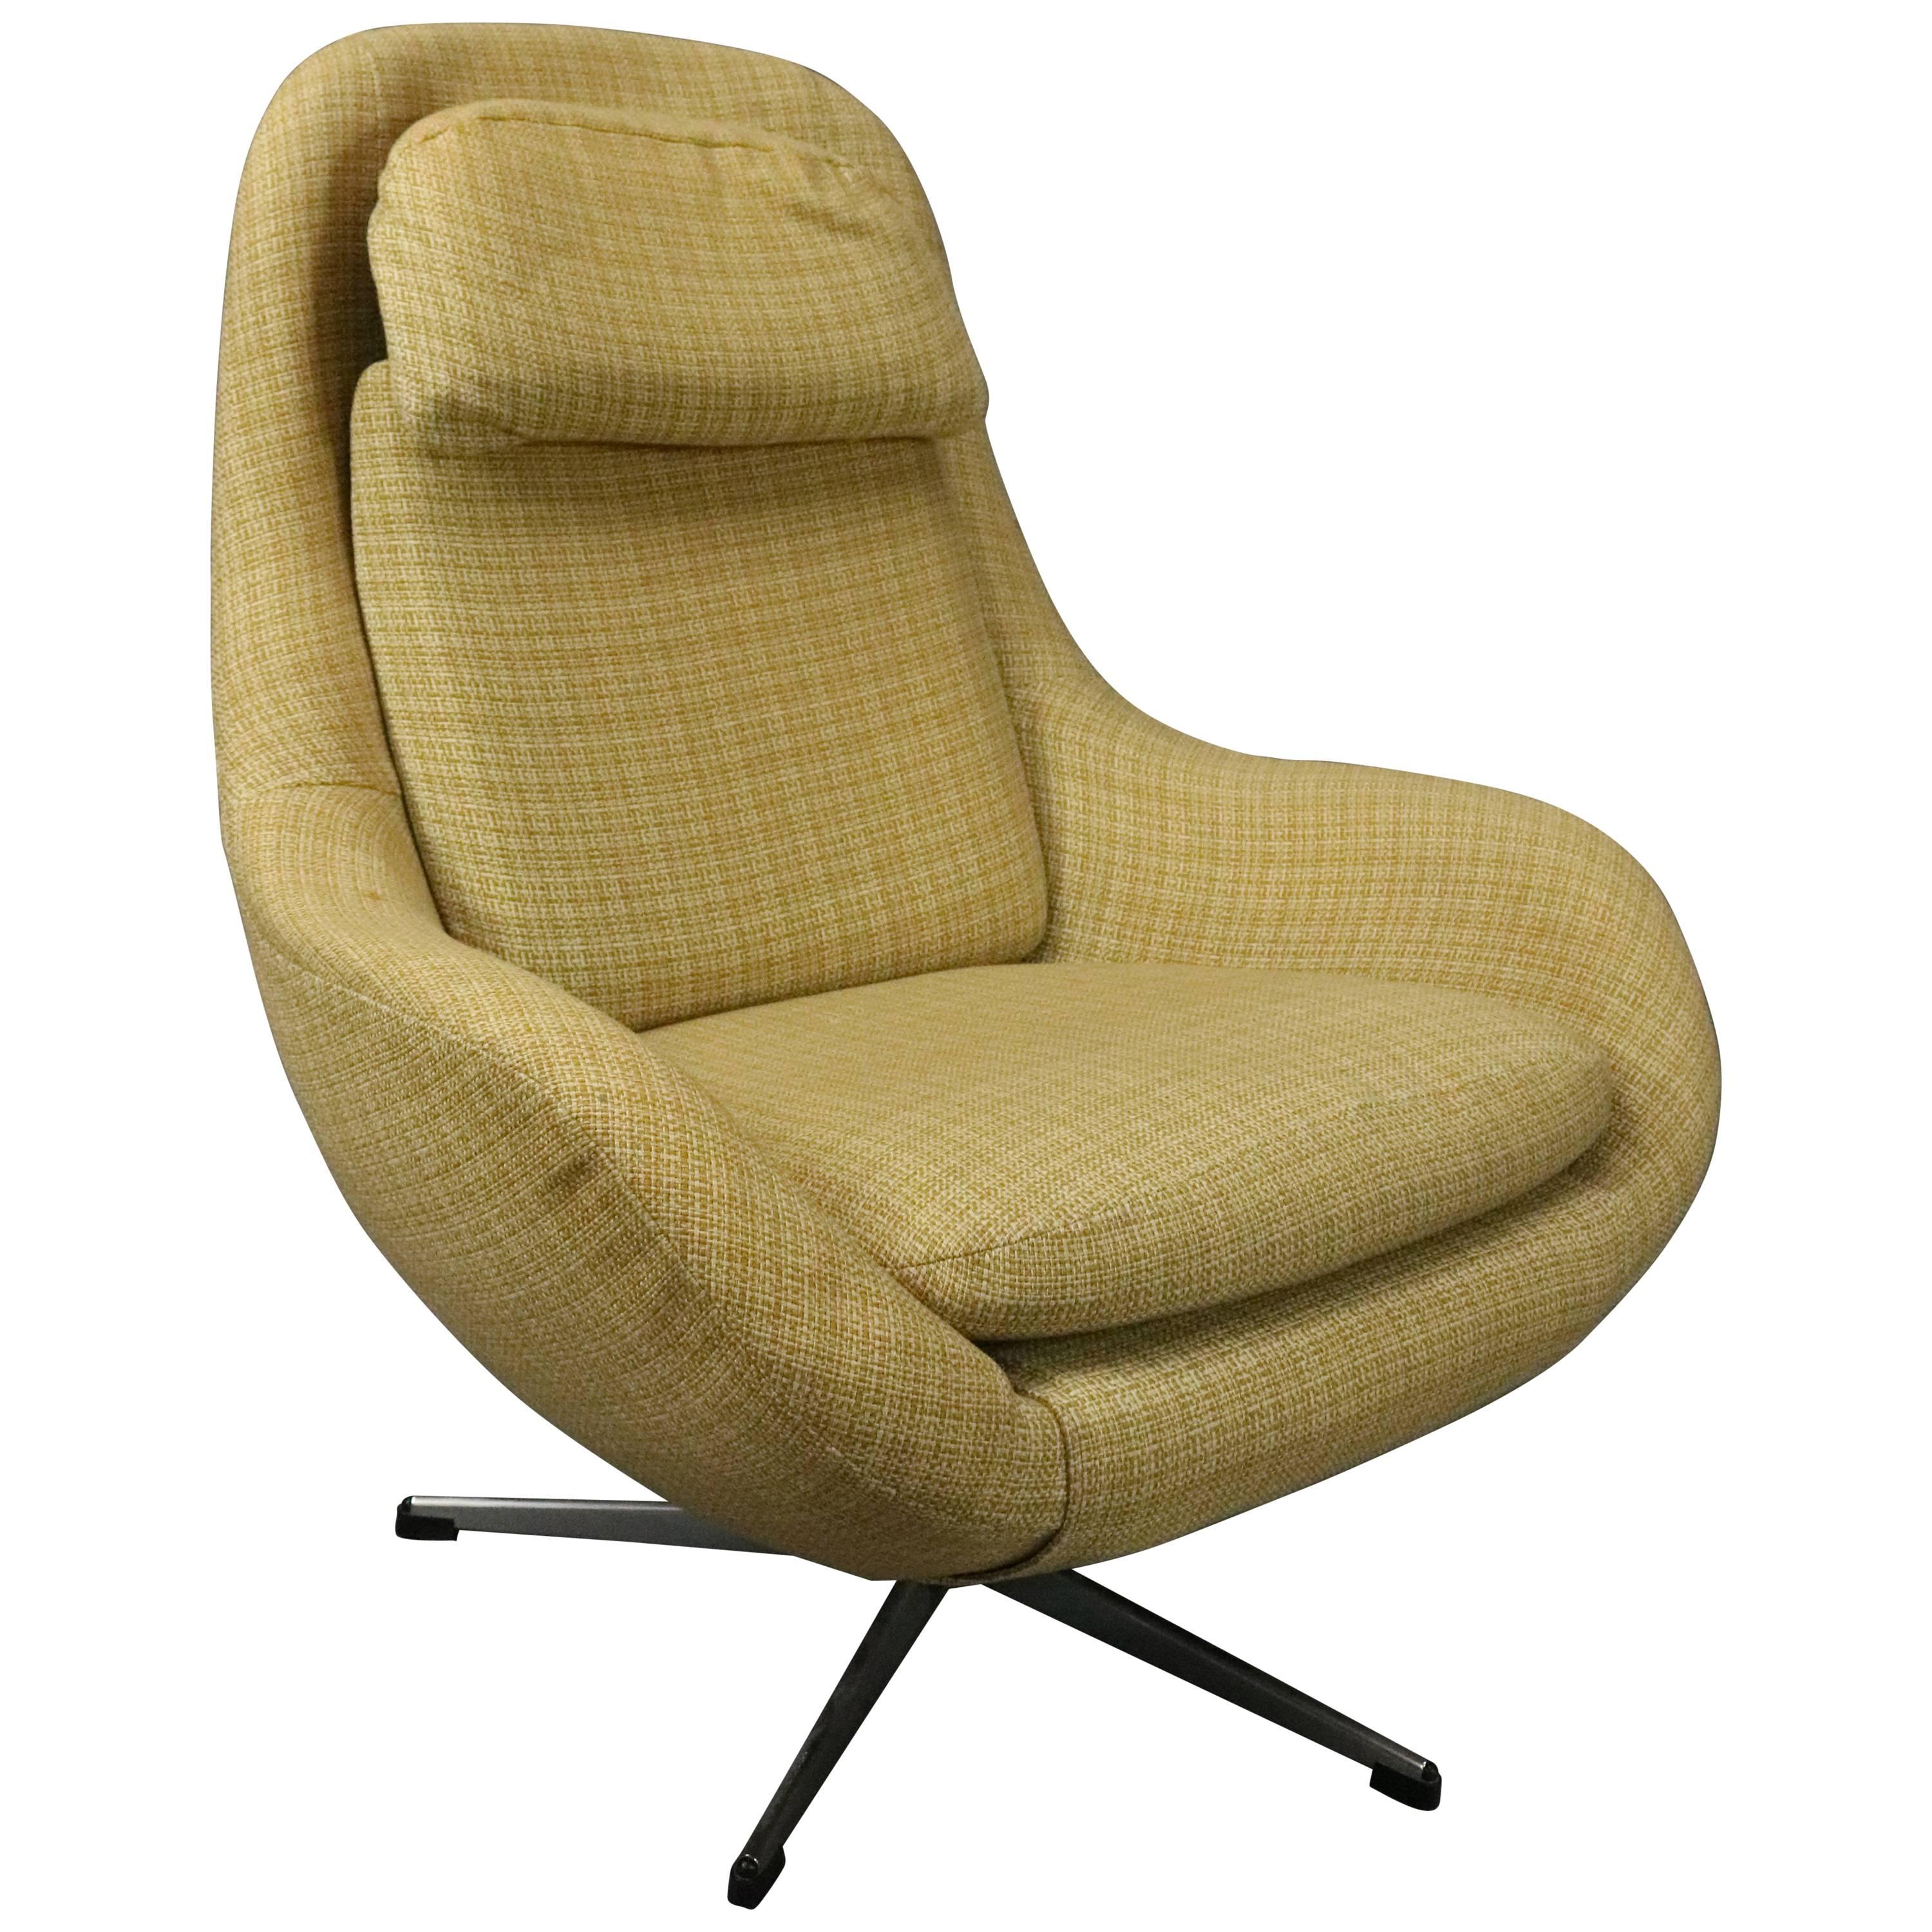 Vintage Mid-Century Modern Knoll Style Upholstered Swivel Club Chair, circa 1960